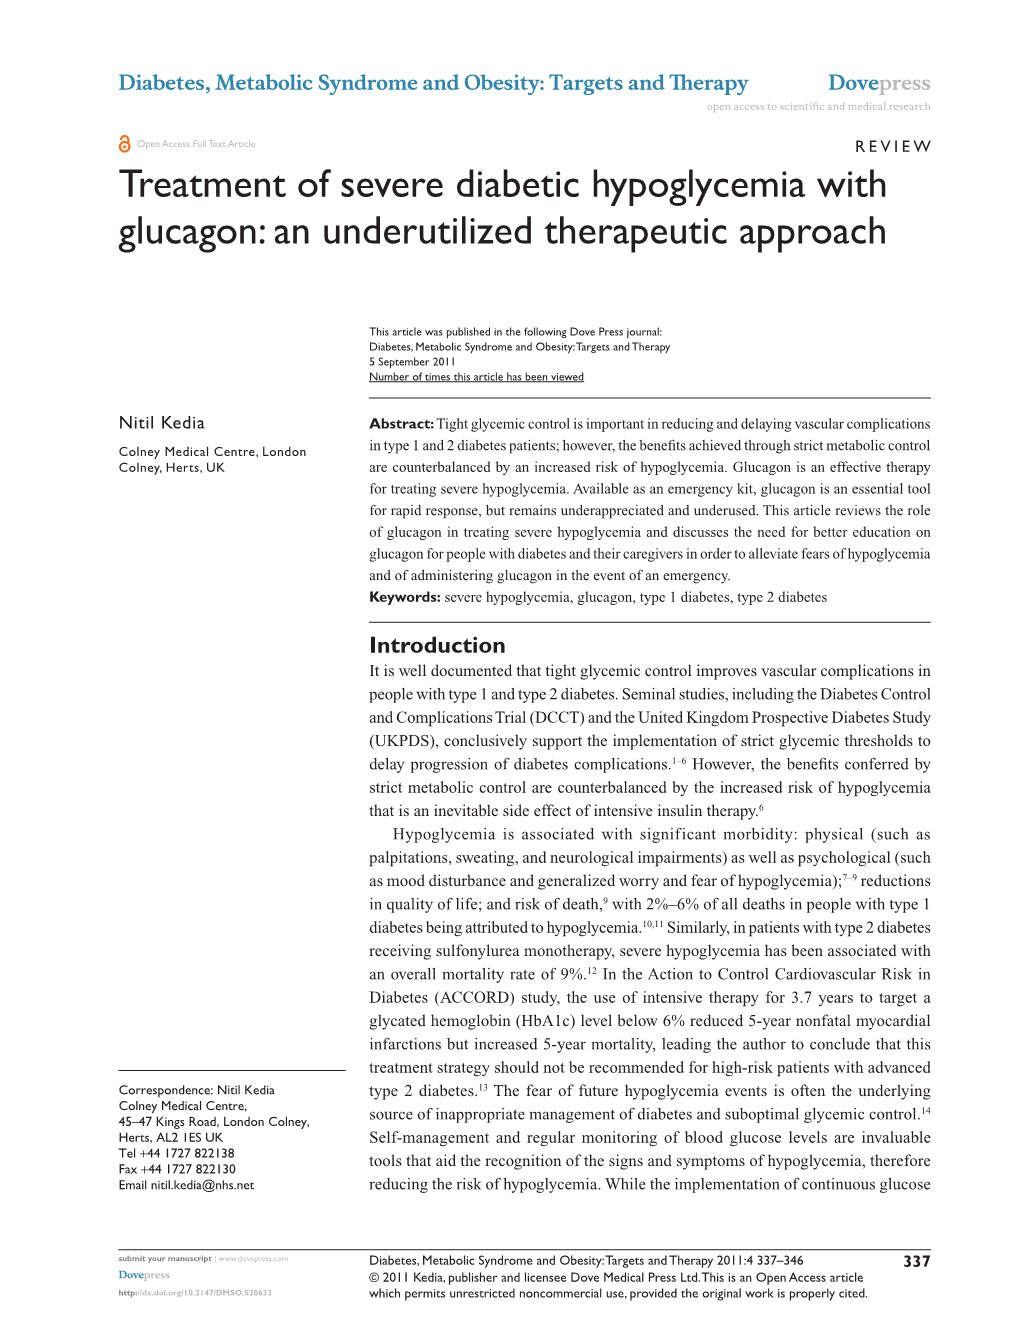 Treatment of Severe Diabetic Hypoglycemia with Glucagon: an Underutilized Therapeutic Approach